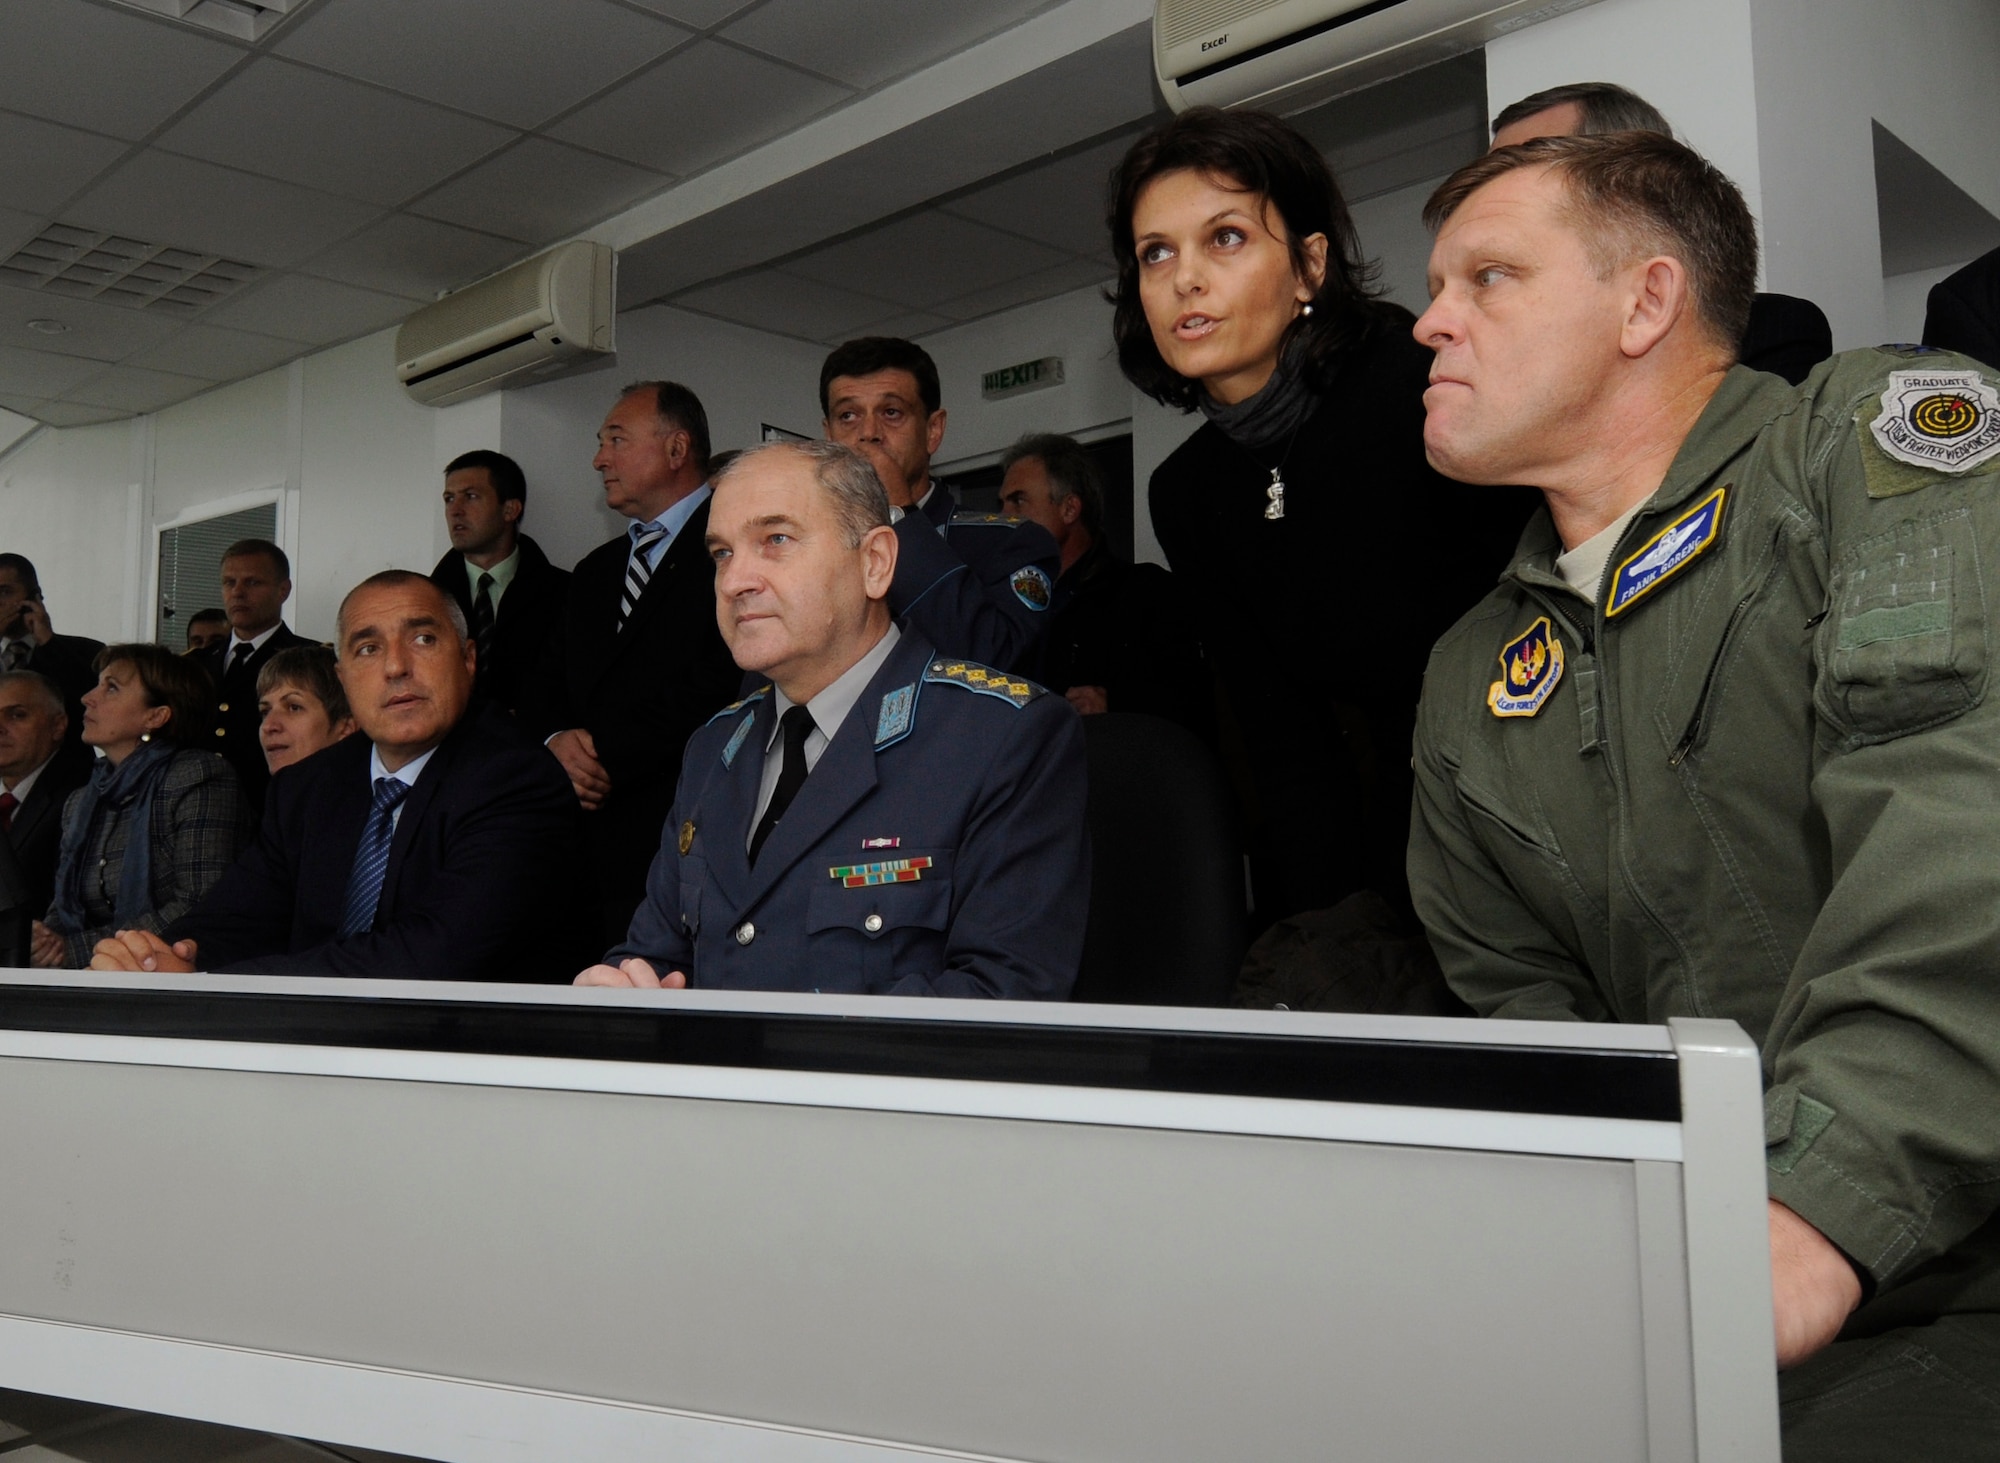 GRAF IGNATIEVO AIR FORCE BASE, Bulgaria - Seated from right to left, Lt. Gen. Frank Gorenc, 3rd Air Force commander; Gen. Simeon Simeonov, Bulgarian Chief of Defense; and Bulgarian Prime Minister Boyko Borisov watch an aerial demonstration of the Bulgarian air force's capabilities during Operation Thracian Star Oct. 14. The operation was a three-week combined exercise that gave both U.S. and Bulgarian Airmen the opportunity to train together and strengthen relationships (U.S. Air Force photo/Staff Sgt. Benjamin Wilson)